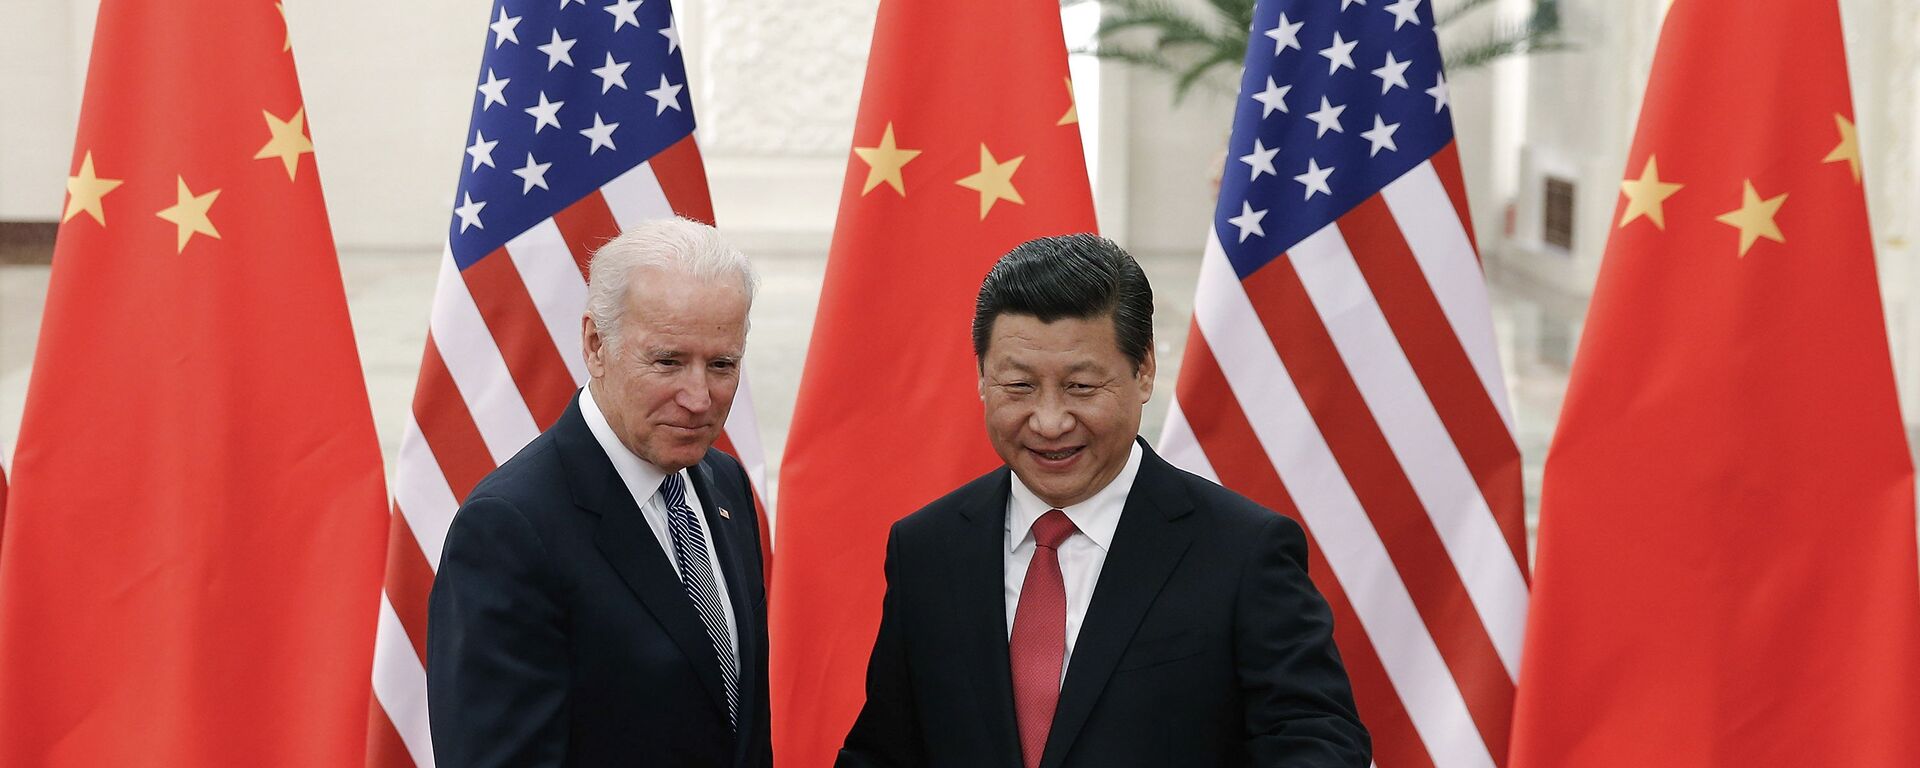 FILE - In this Dec. 4, 2013, file photo, Chinese President Xi Jinping, right, shakes hands with then U.S. Vice President Joe Biden as they pose for photos at the Great Hall of the People in Beijing. - Sputnik International, 1920, 16.02.2021